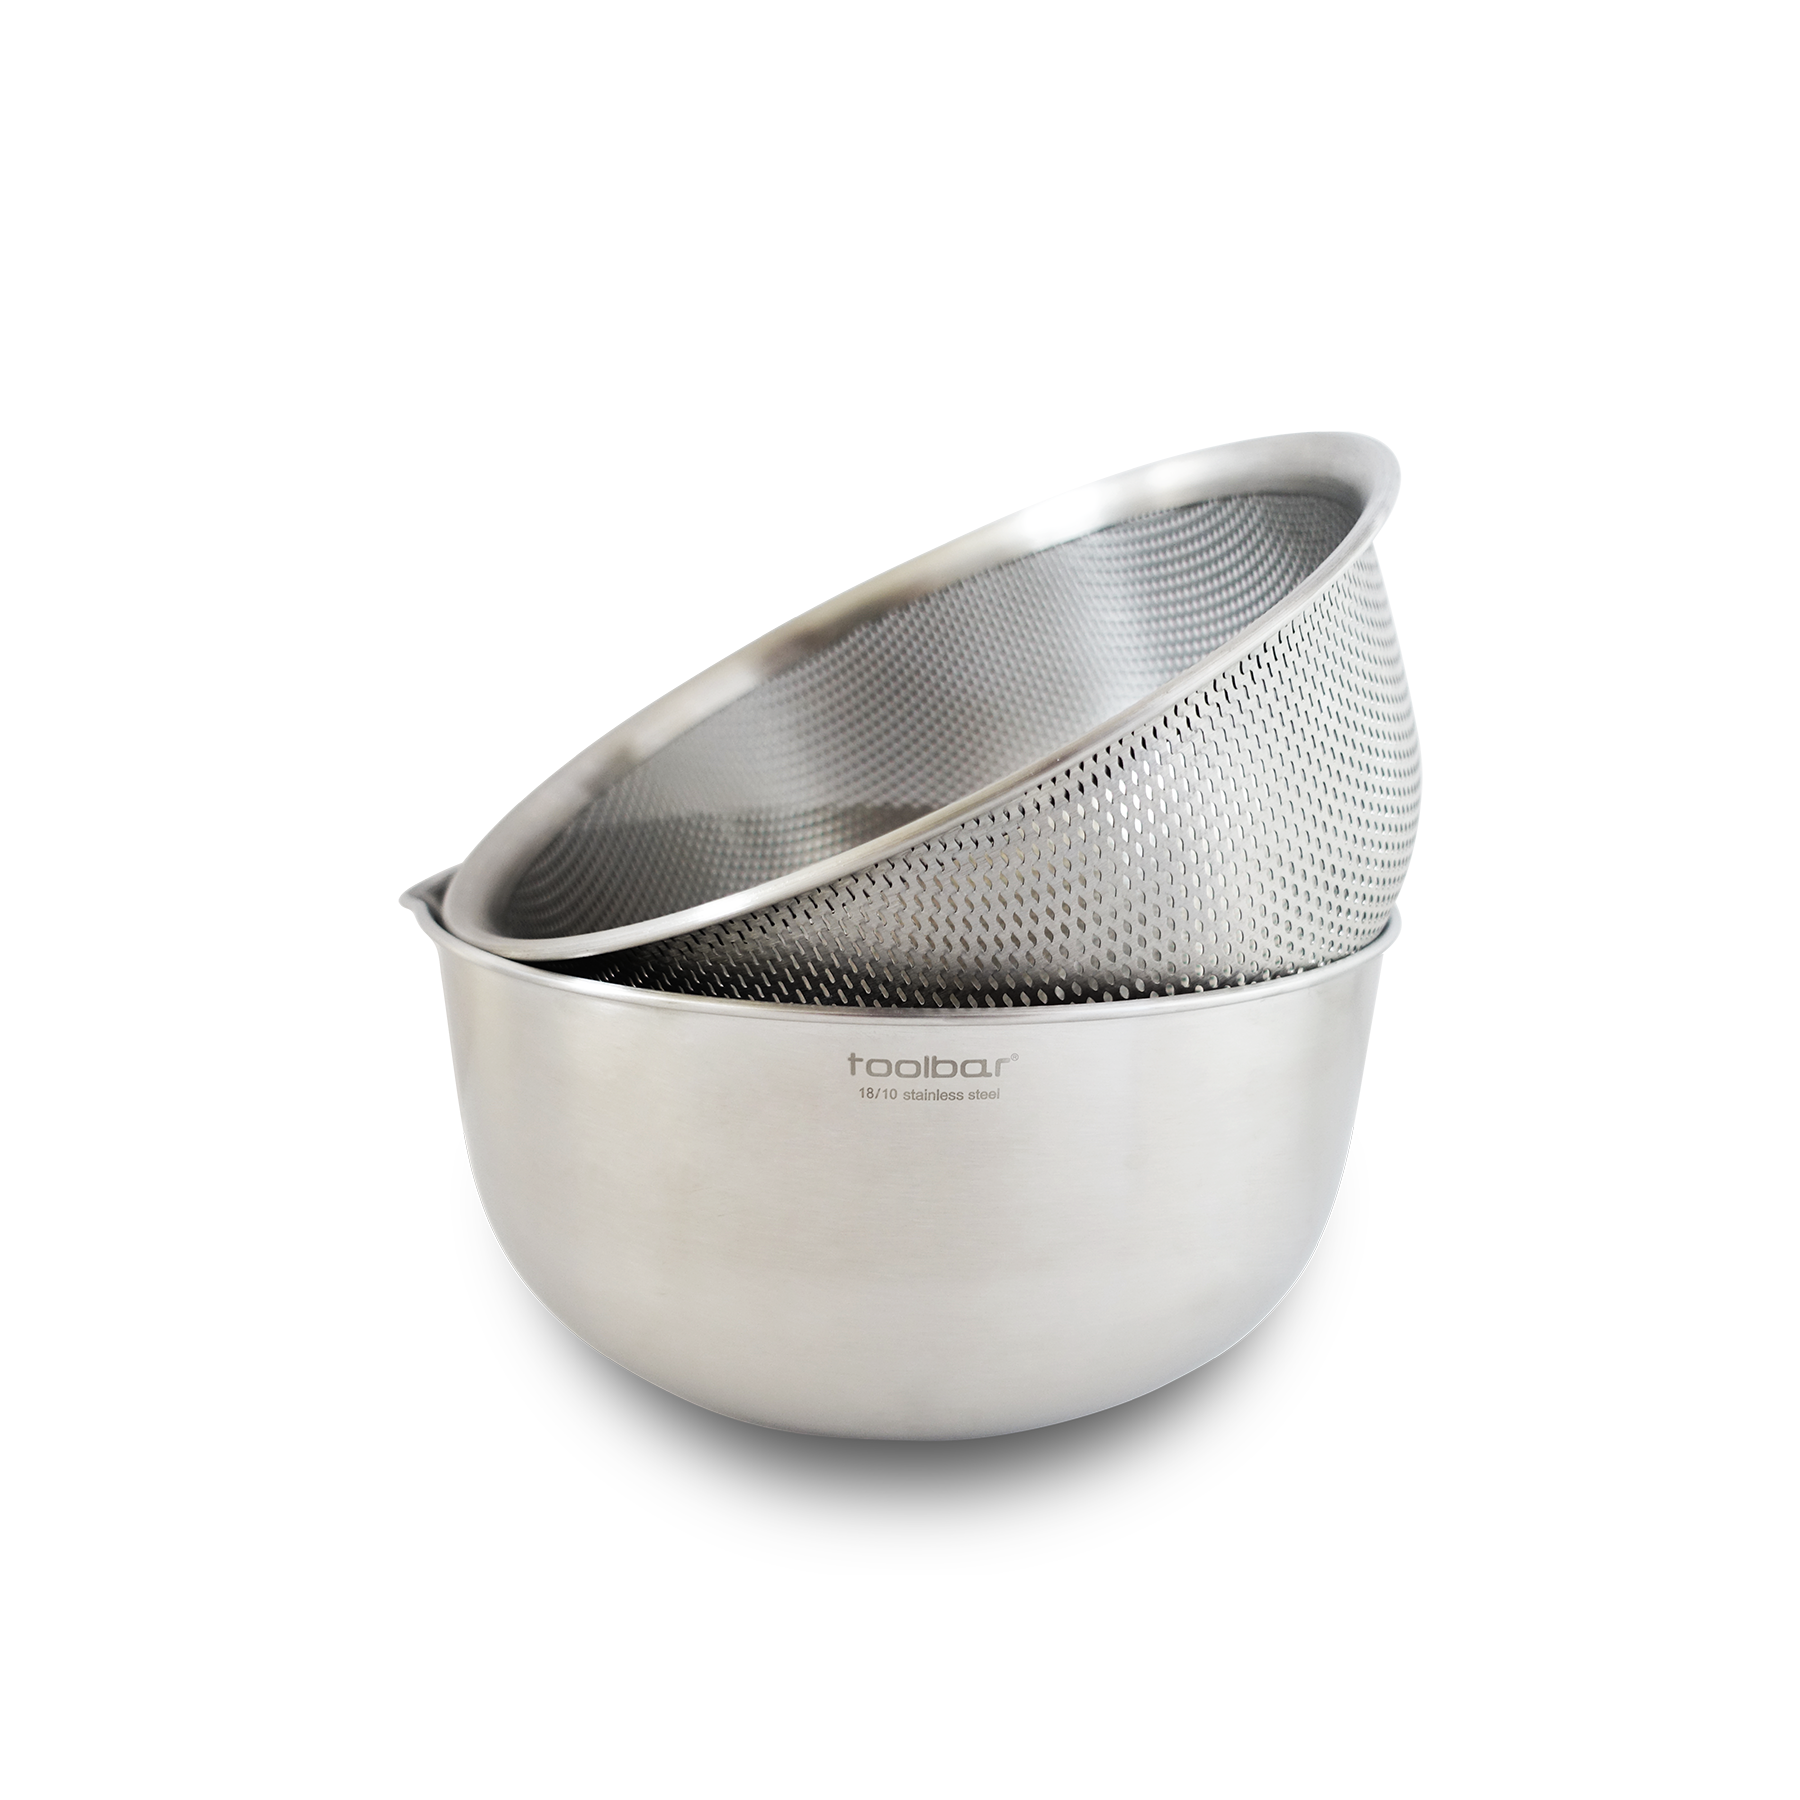 Stainless Steel Mixing Bowl With Colander